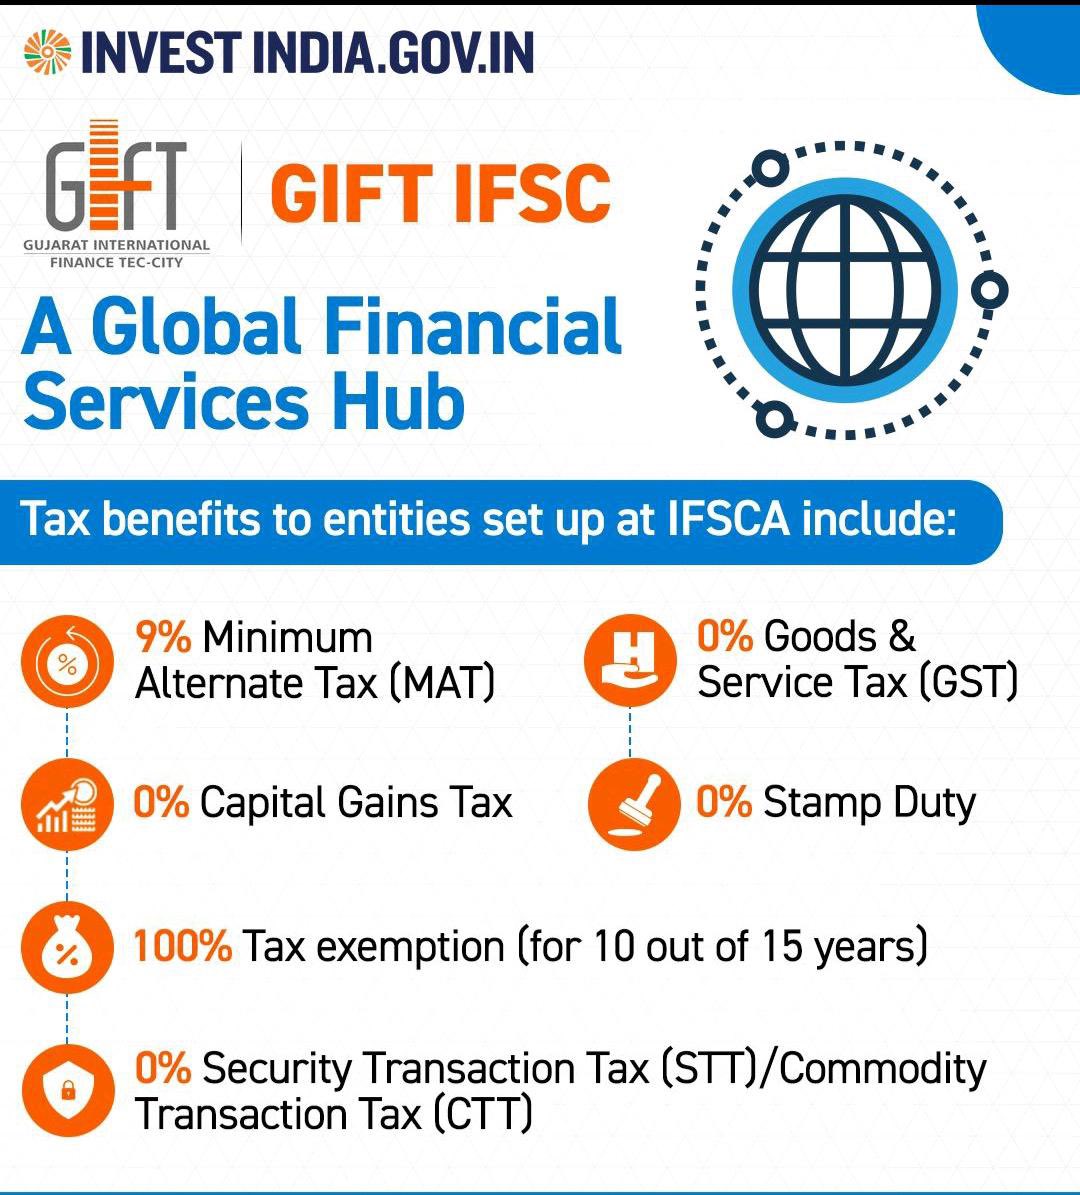 *TAX holiday* for capital gains for aircraft leasing companies, sops for relocating foreign funds in the IFSC. It also allowed *tax exemption to the investment division of foreign banks located in IFSCA.
@SavvyAhmedabad @GIFTCity_ @ASSOCHAM4India https://t.co/8HnzoVzroy